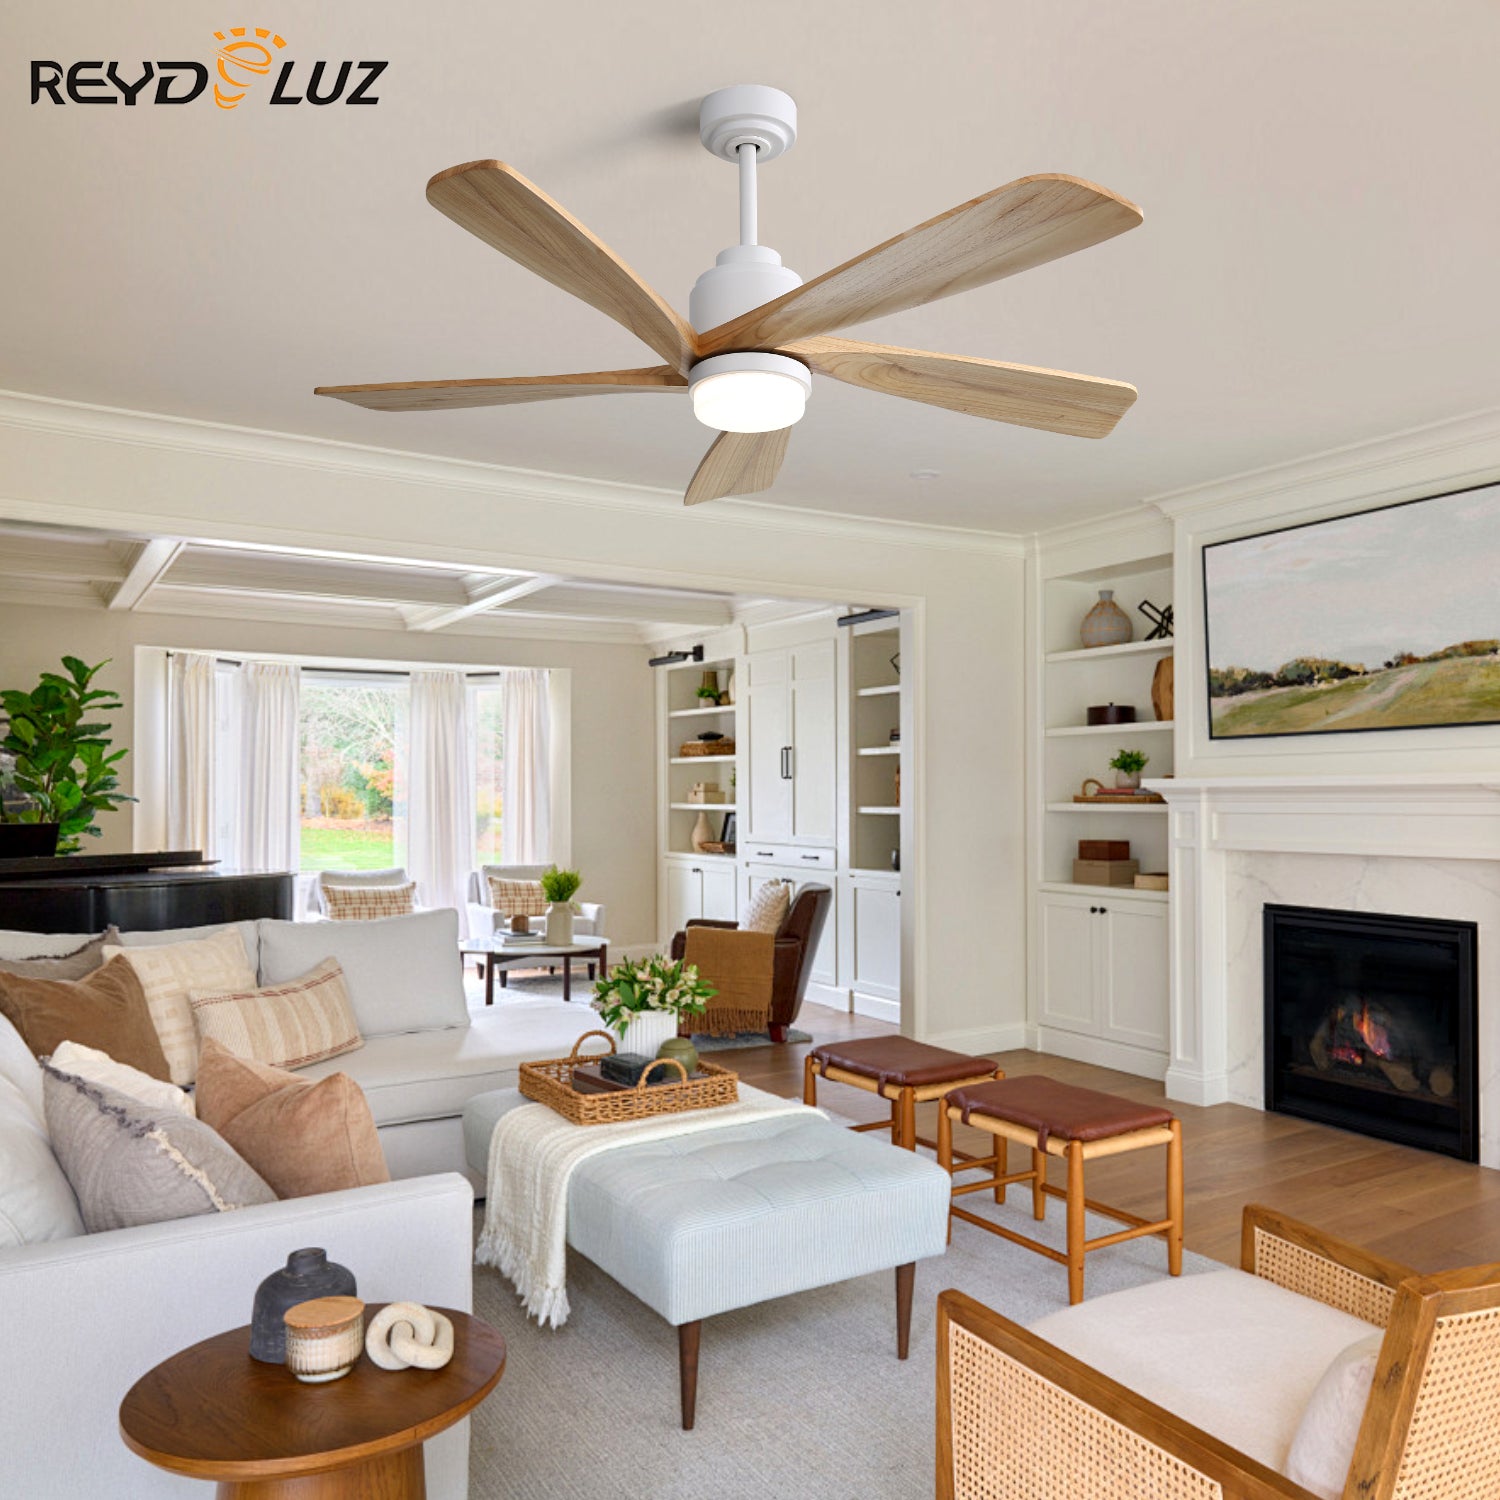 REYDELUZ 52" Modern Ceiling Fan With Dimmable LED Light.